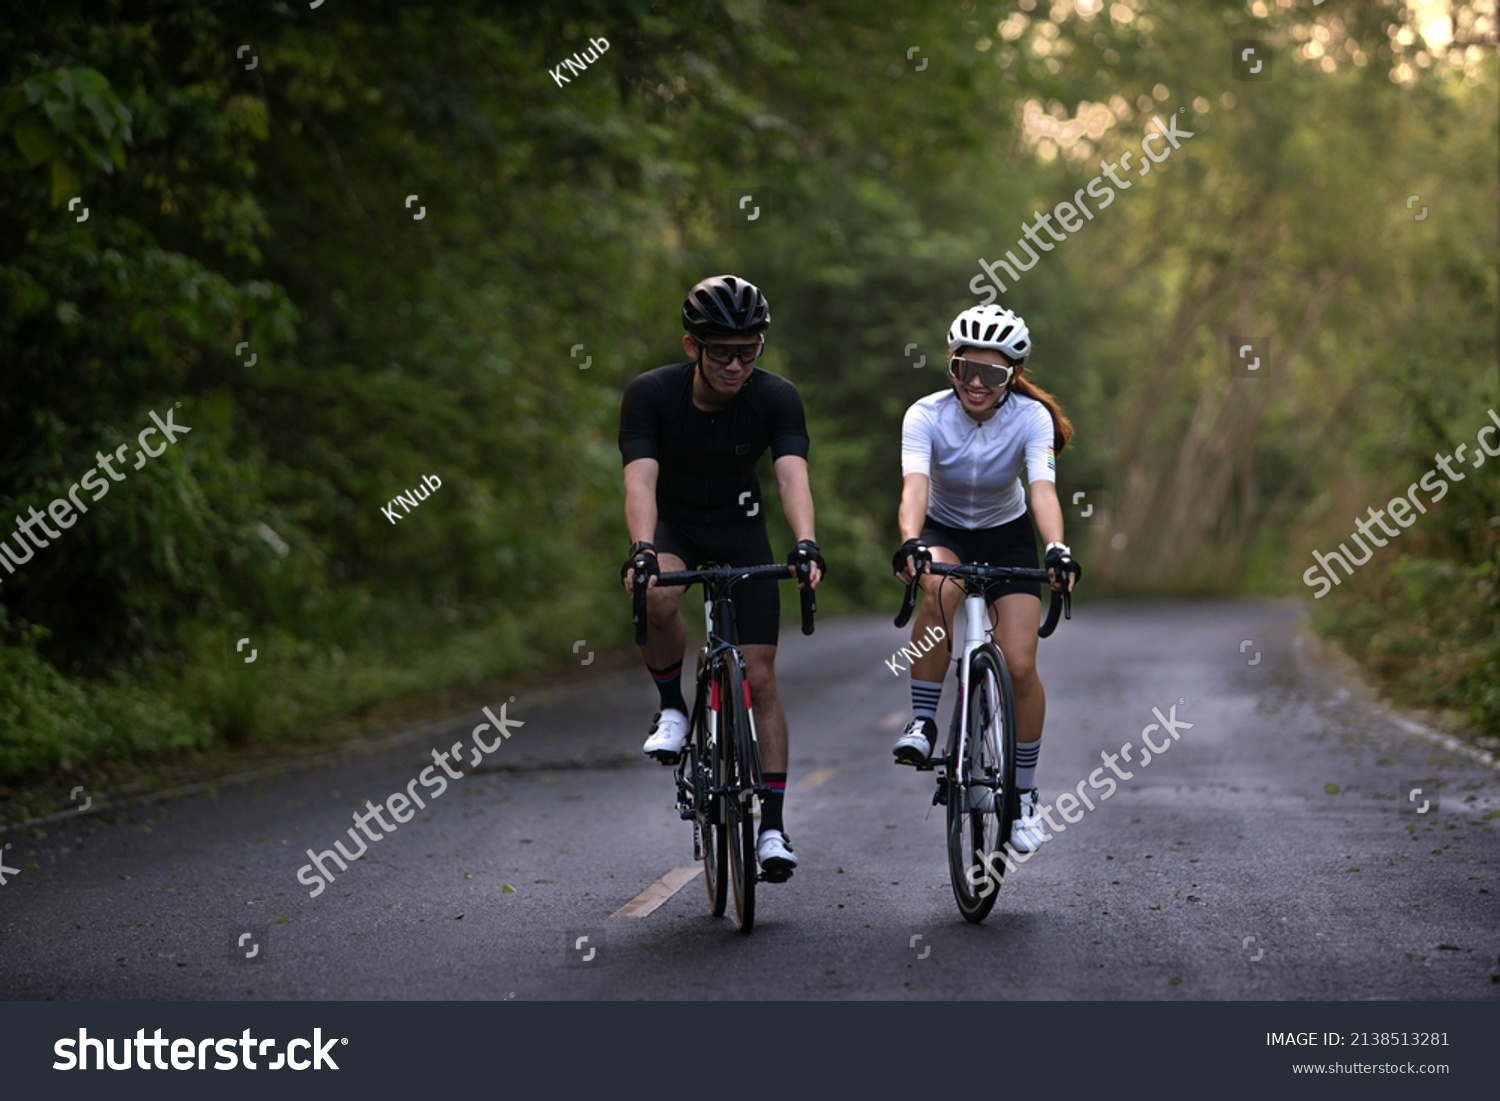 happy couple cycle or ride bicycle on rode in countryside for health life style #2138513281